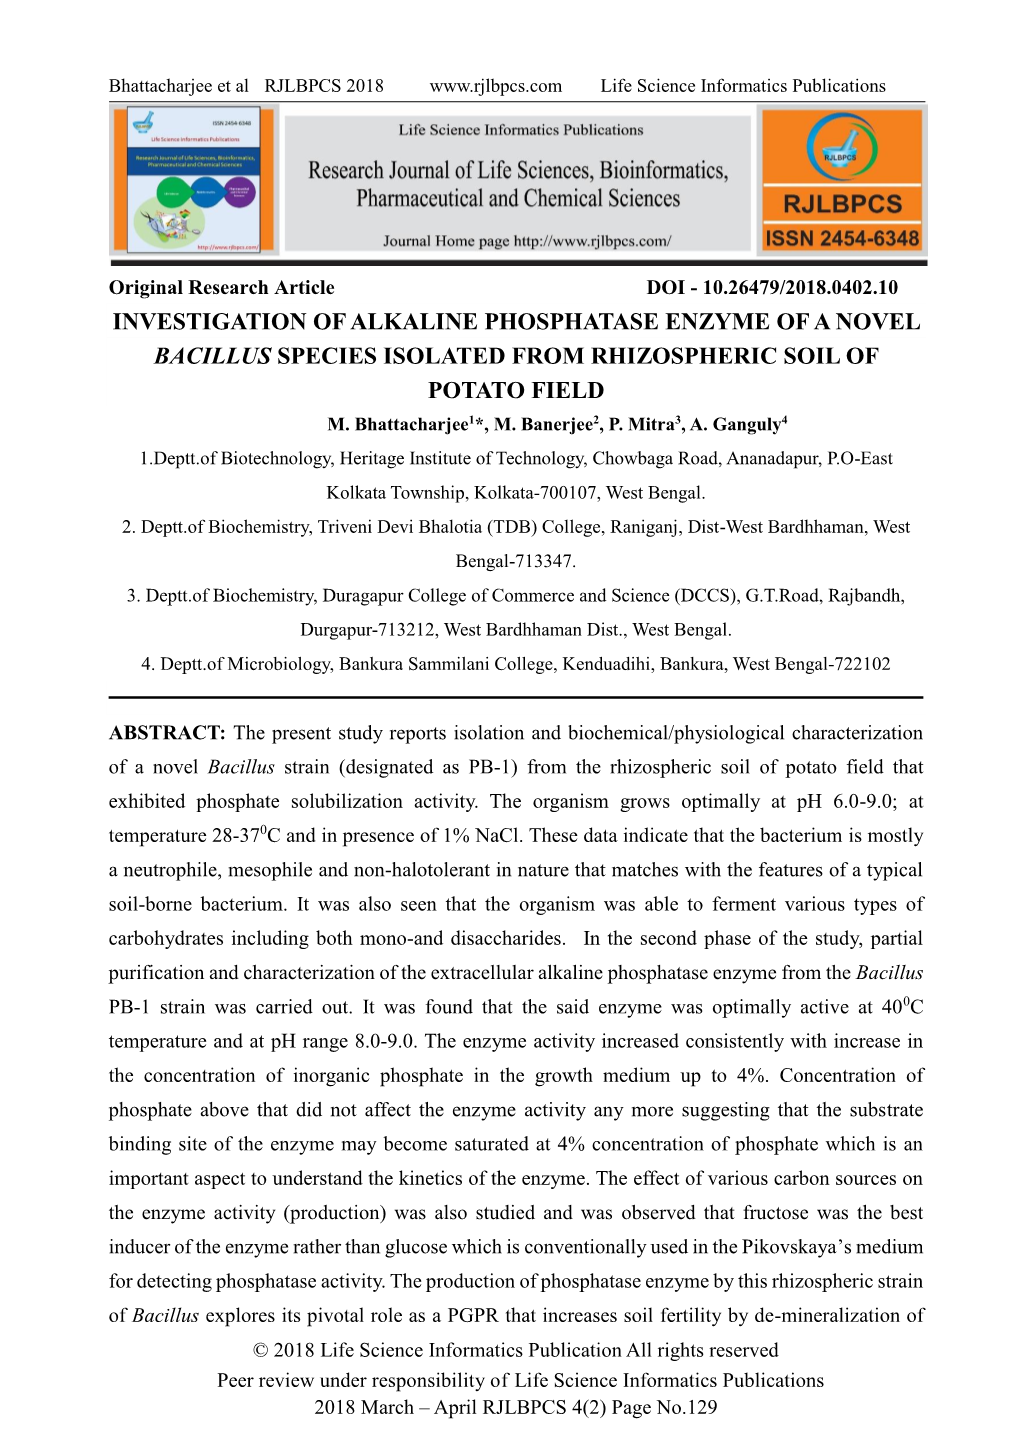 Investigation of Alkaline Phosphatase Enzyme of a Novel Bacillus Species Isolated from Rhizospheric Soil of Potato Field M